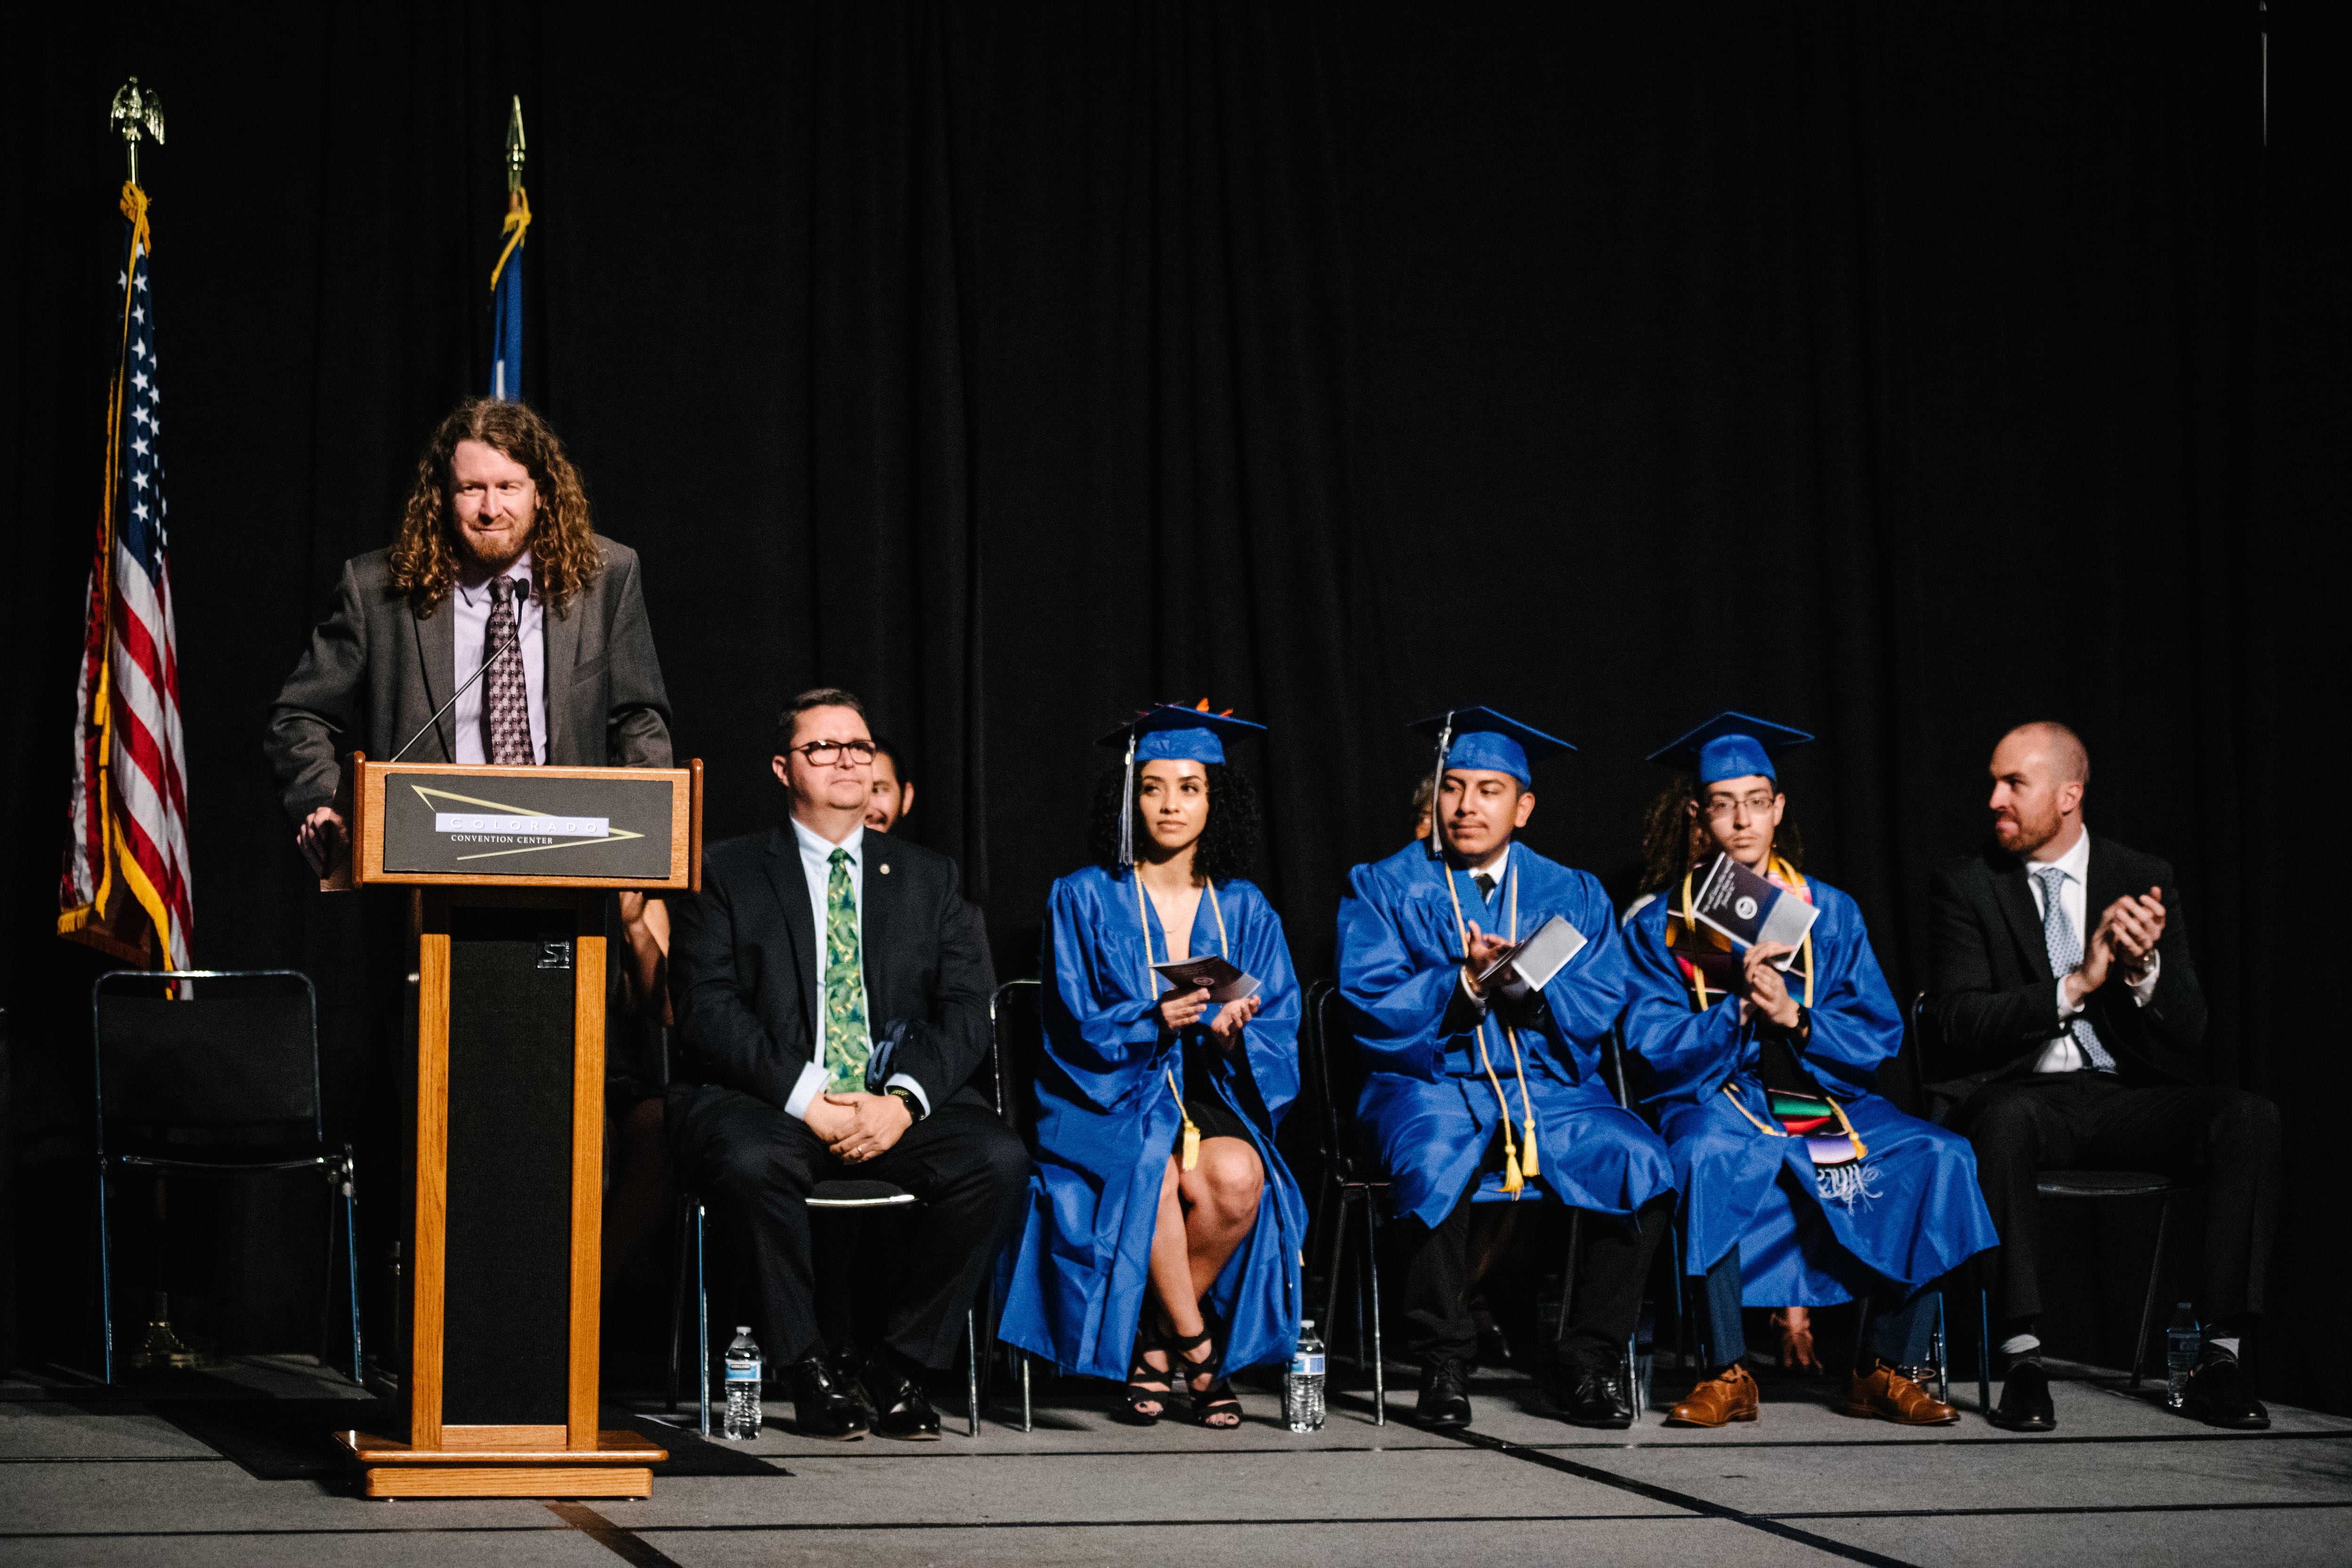 A man with shoulder-length curly red hair speaks from a lectern, dressed in a suit and tie. To his left sit two other men in suits and three teenagers in bright blue graduation caps and gowns. 